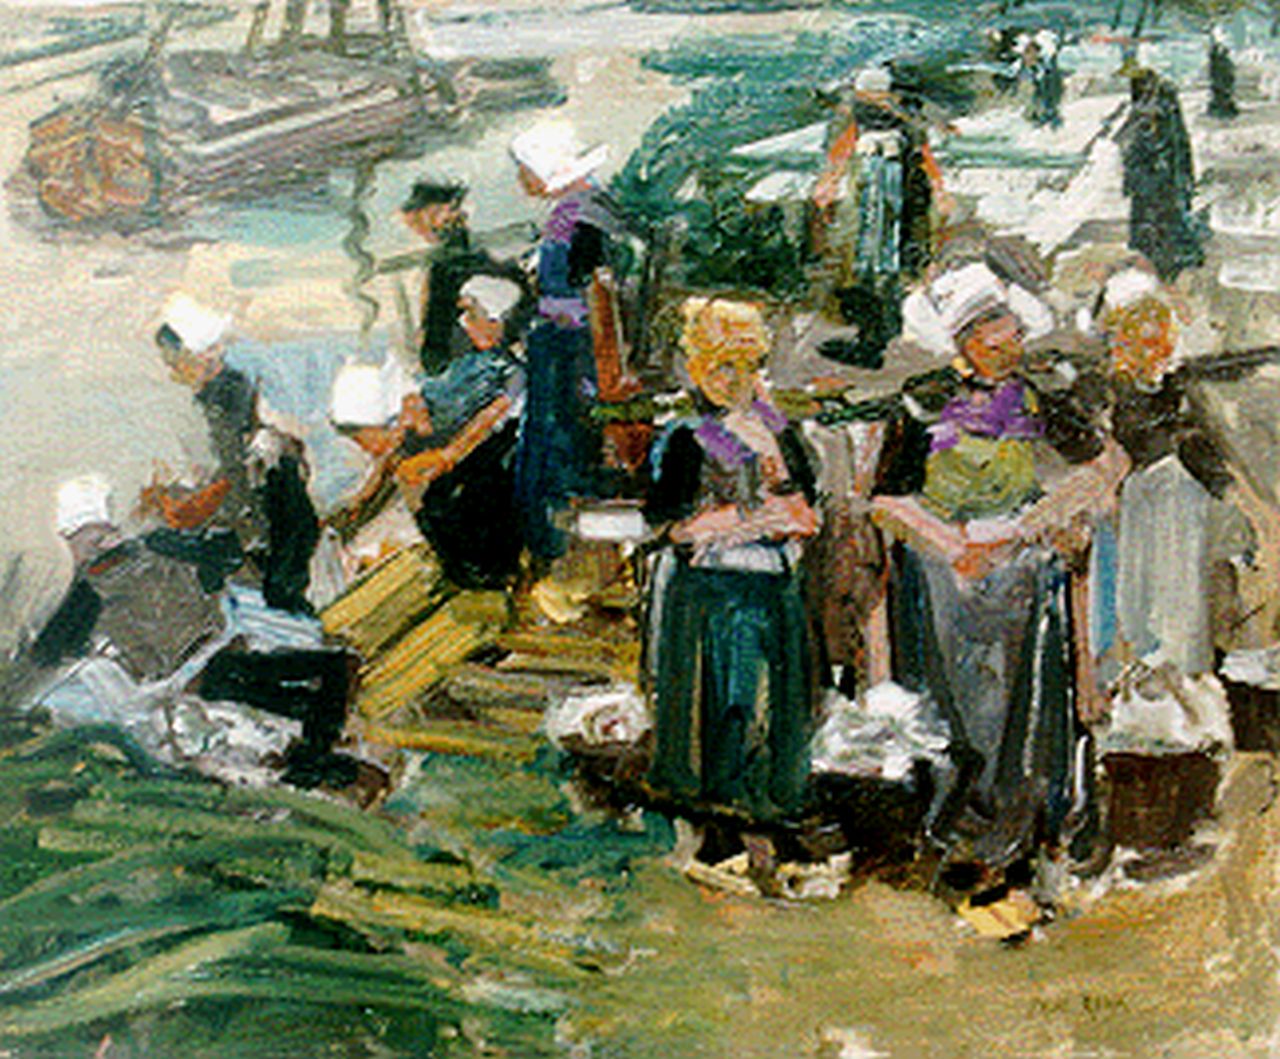 Rink P.Ph.  | Paulus Philippus 'Paul' Rink, Fisher folk, oil on canvas 36.5 x 45.0 cm, signed l.r. and on the reverse